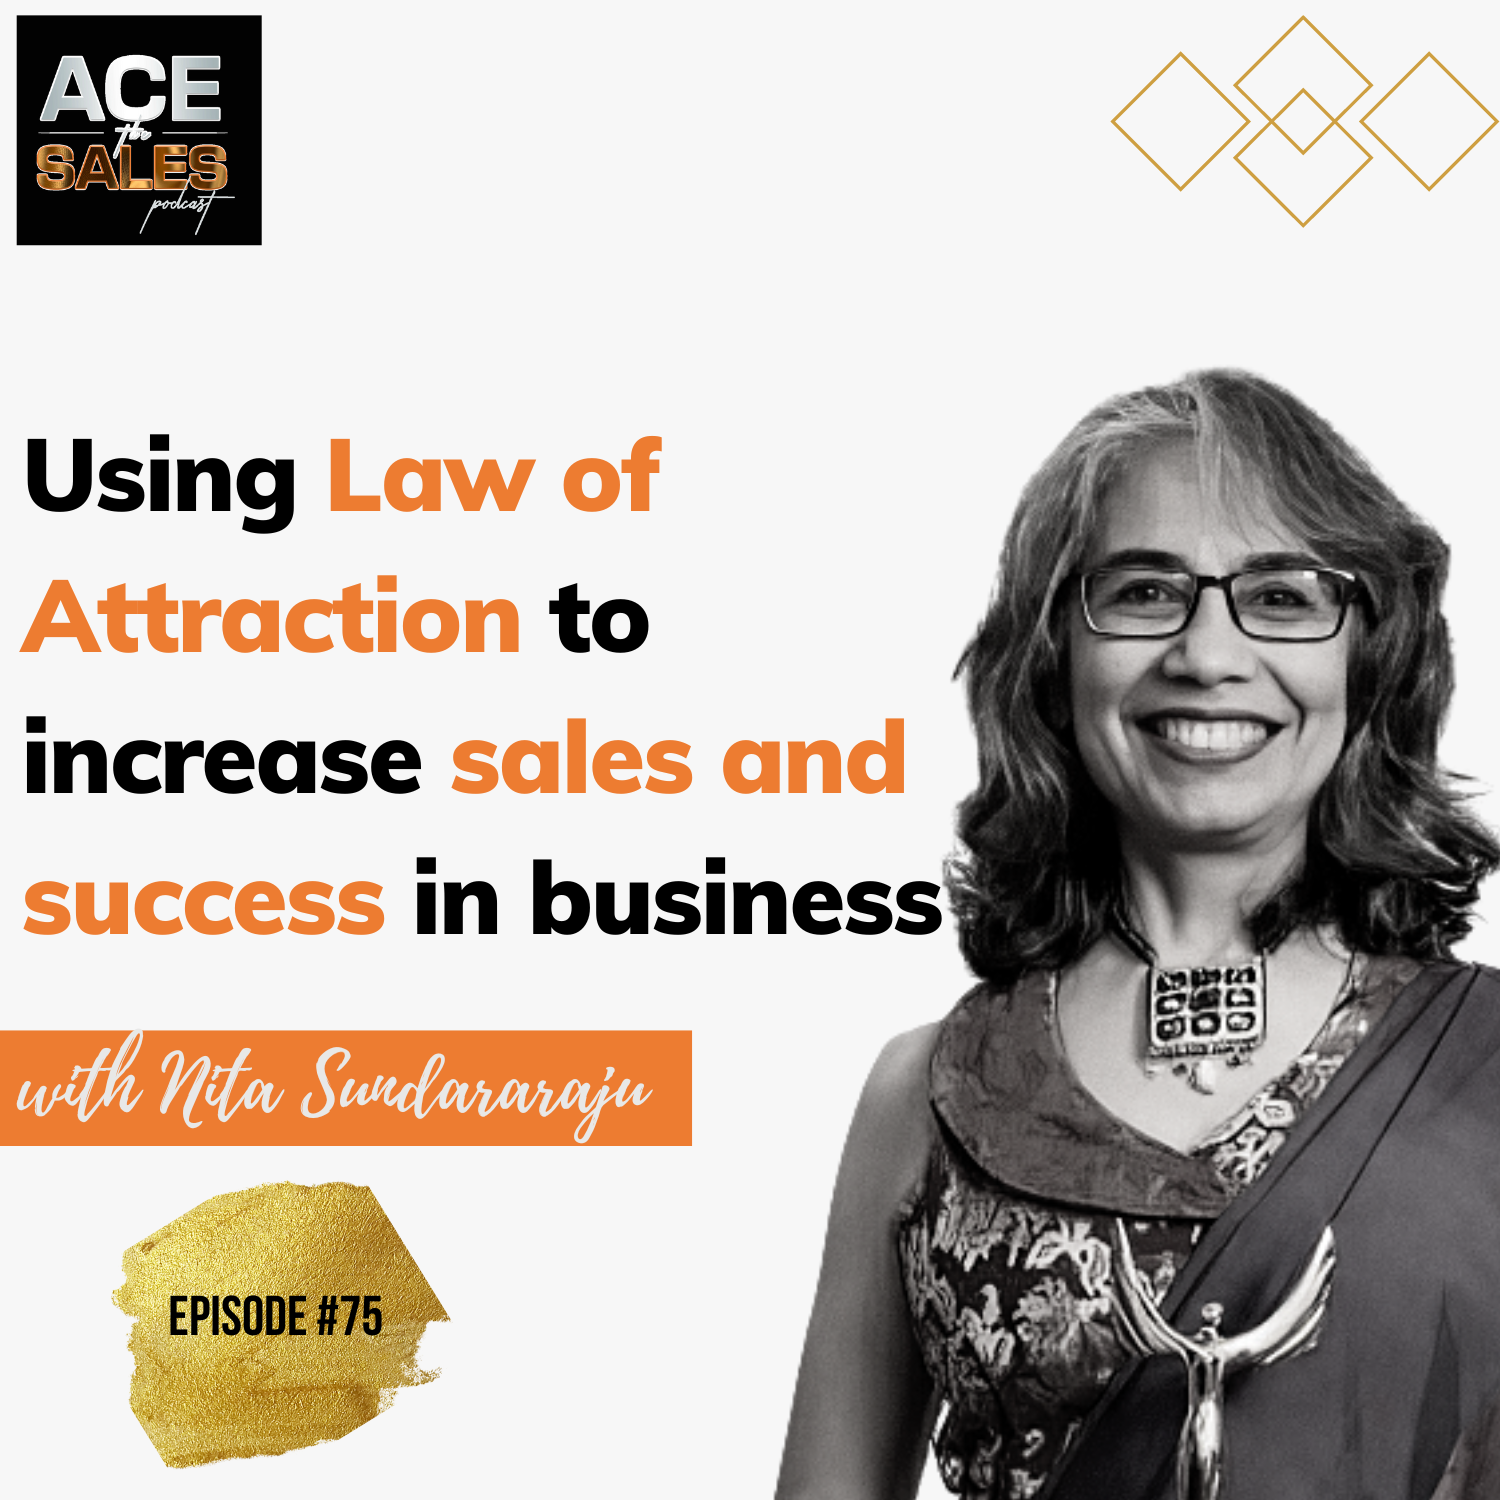 Using Law of Attraction to increase sales and success in business - Nita Sundararaju